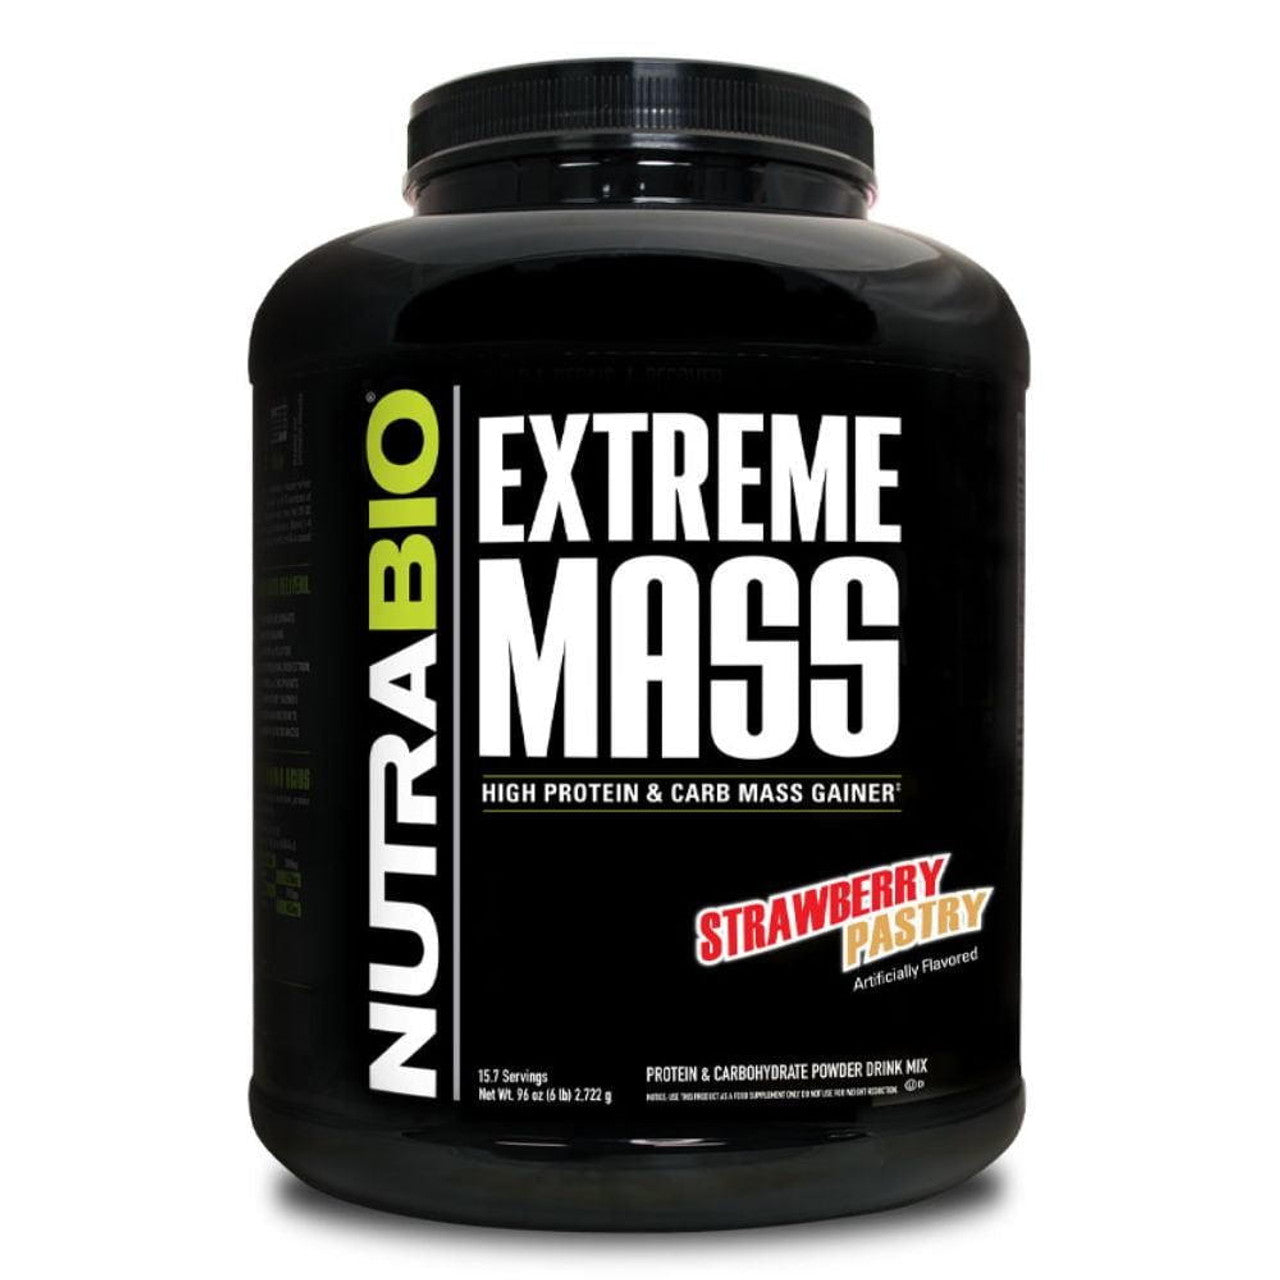 Nutrabio Extreme Mass Gainer 6 lb- Strawberry Pastry